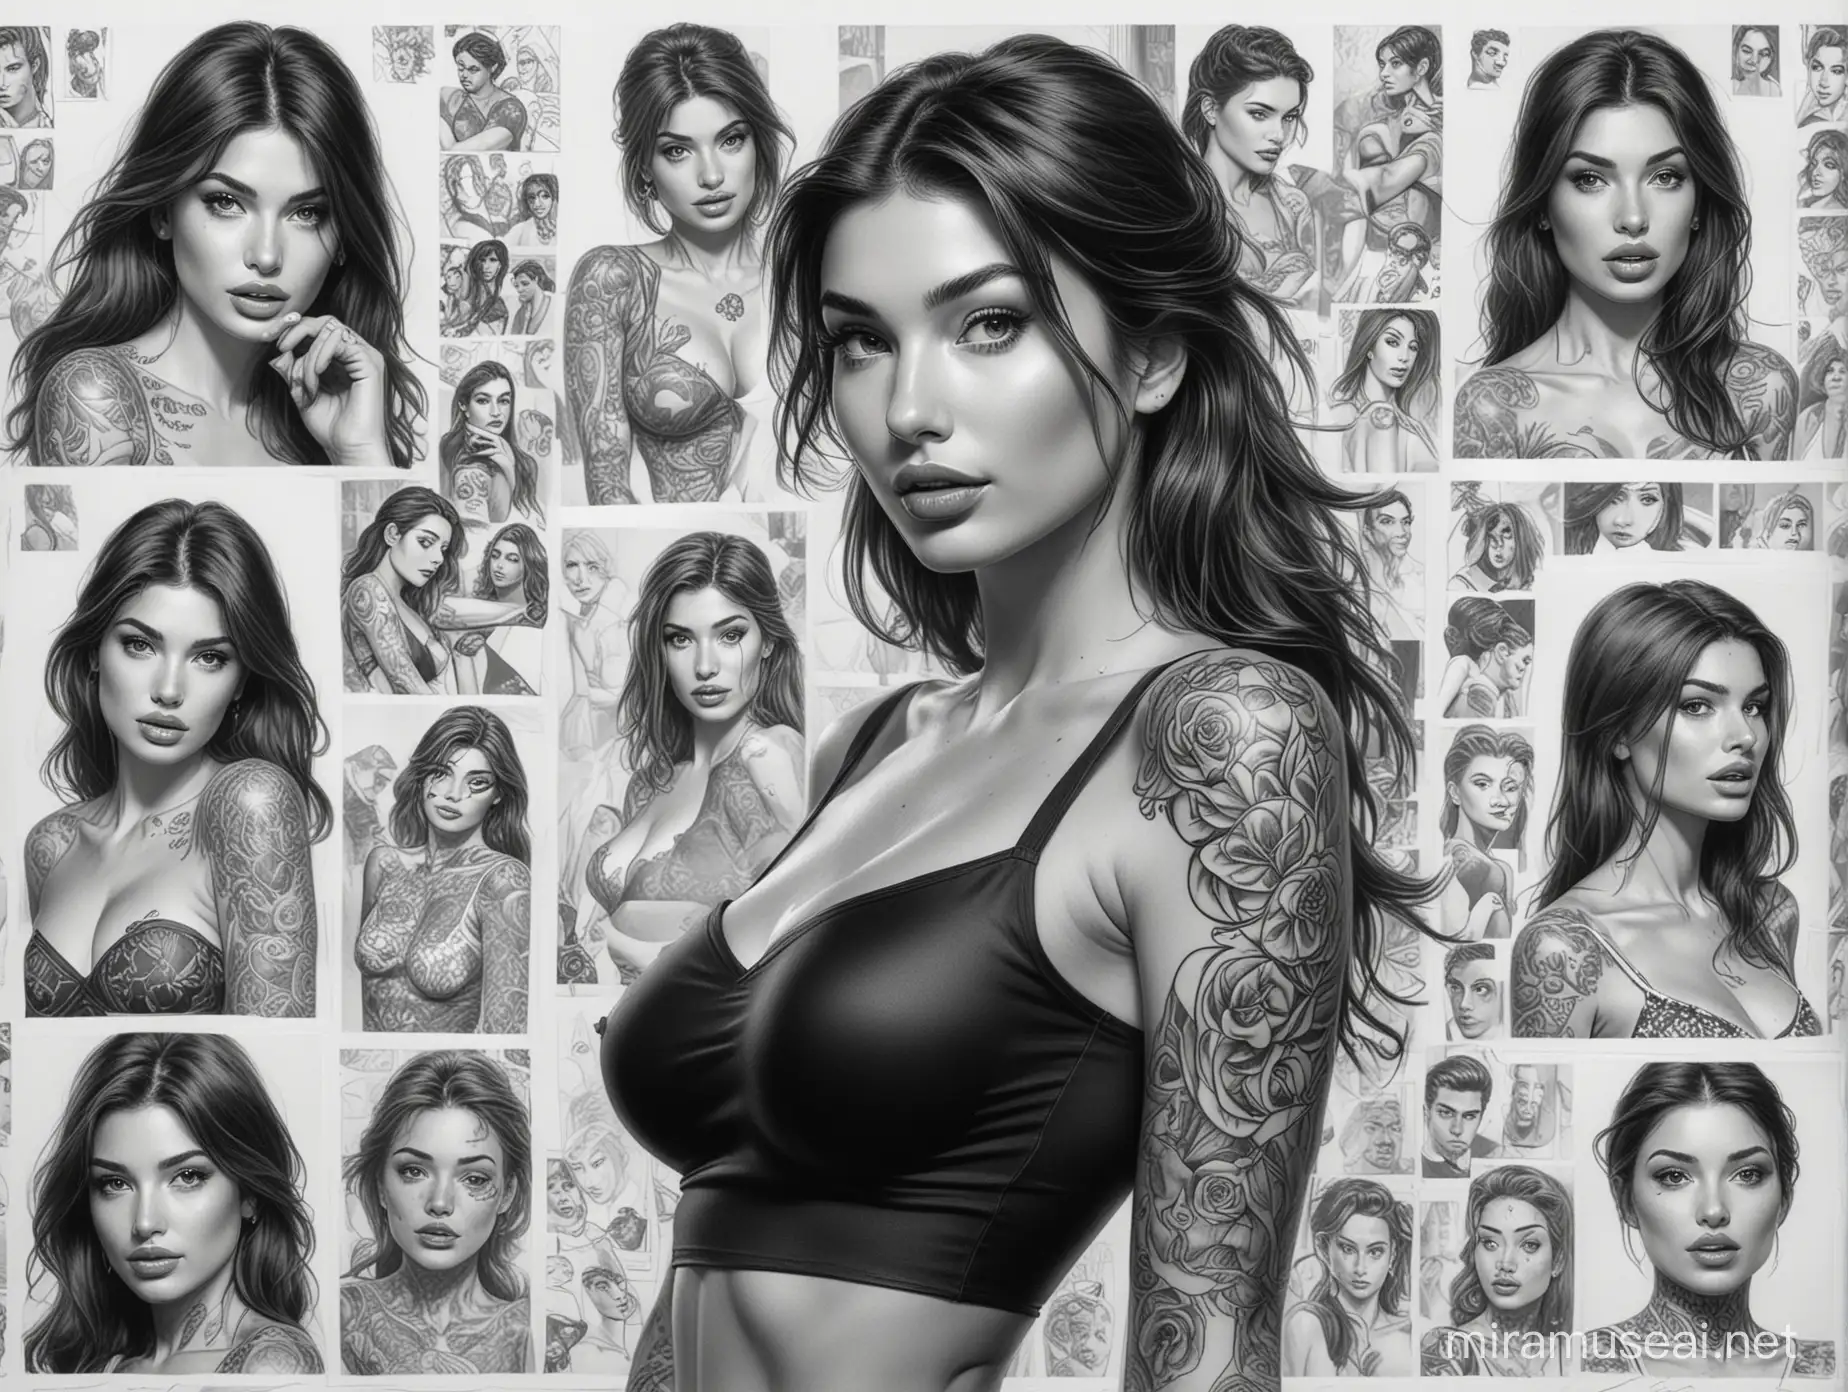 Vintage Comic Style Portraits Camila Morrone in Tattooed Black and White Sketches